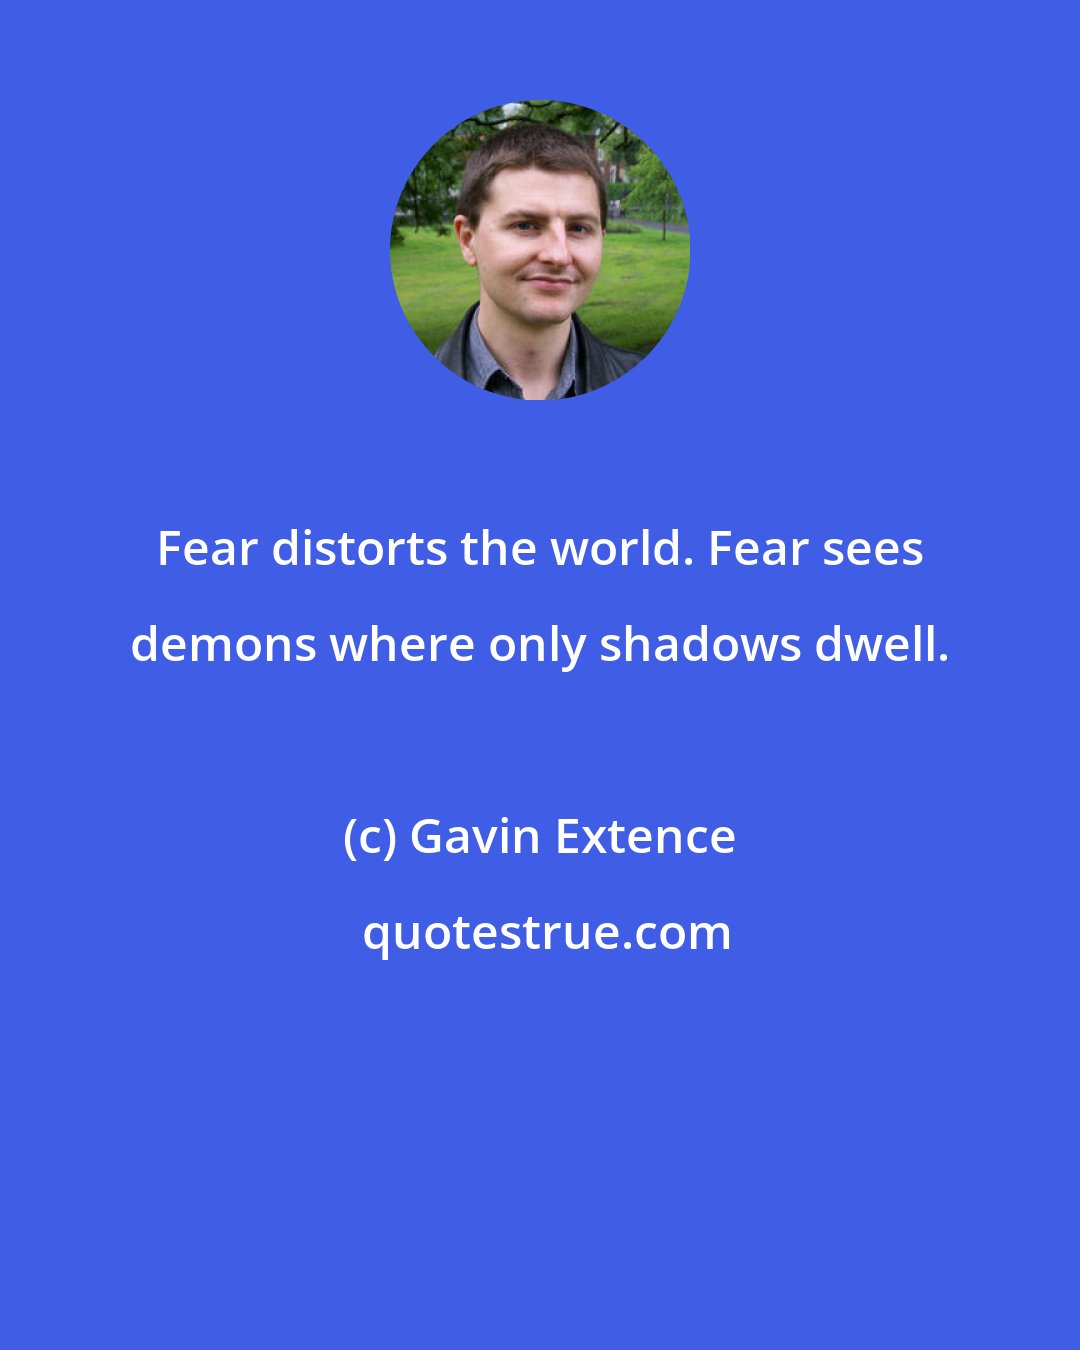 Gavin Extence: Fear distorts the world. Fear sees demons where only shadows dwell.